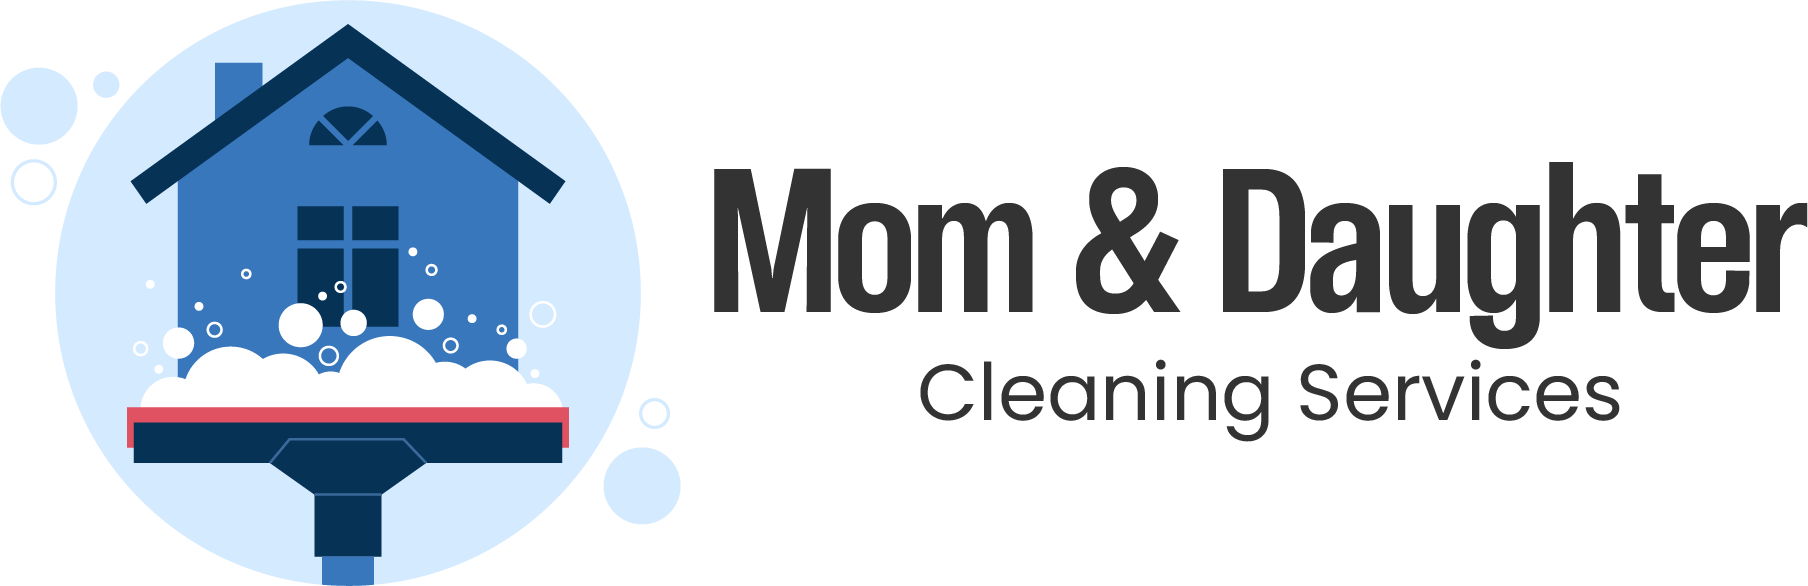 Mom & Daughter Cleaning Services